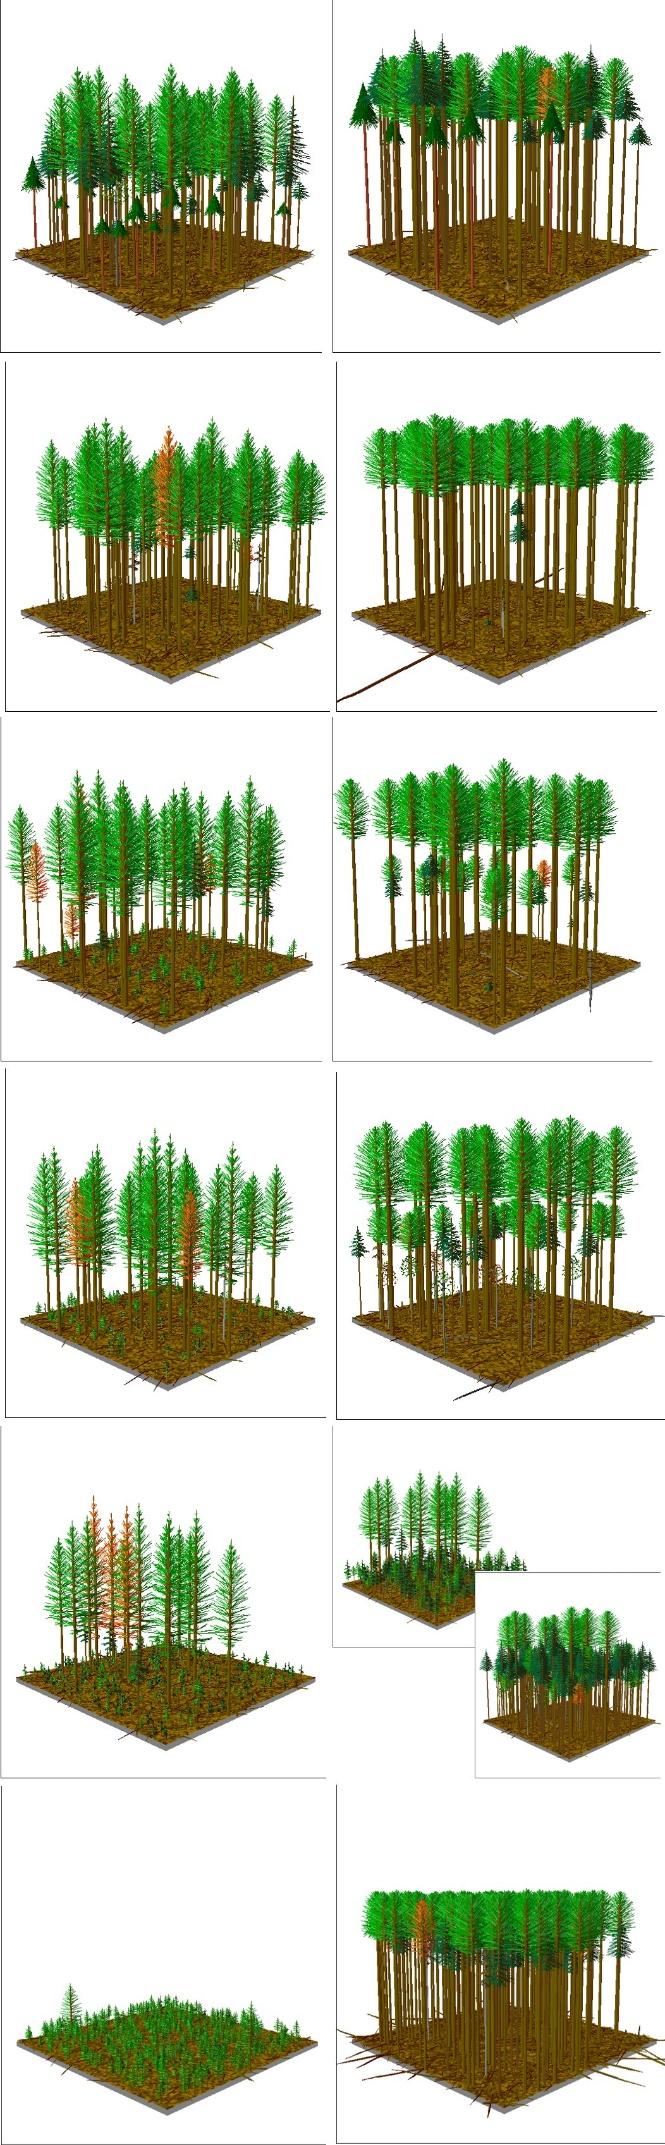 10 years 100 years Carbon Modeling for Blueridge Study Site Dylan Fischer, Evergreen State College CONTROL THIN 300 Ten Year Average C PATCHES GROUPS Aboveground Tree C (Tons C ha -1 ) 250 200 150